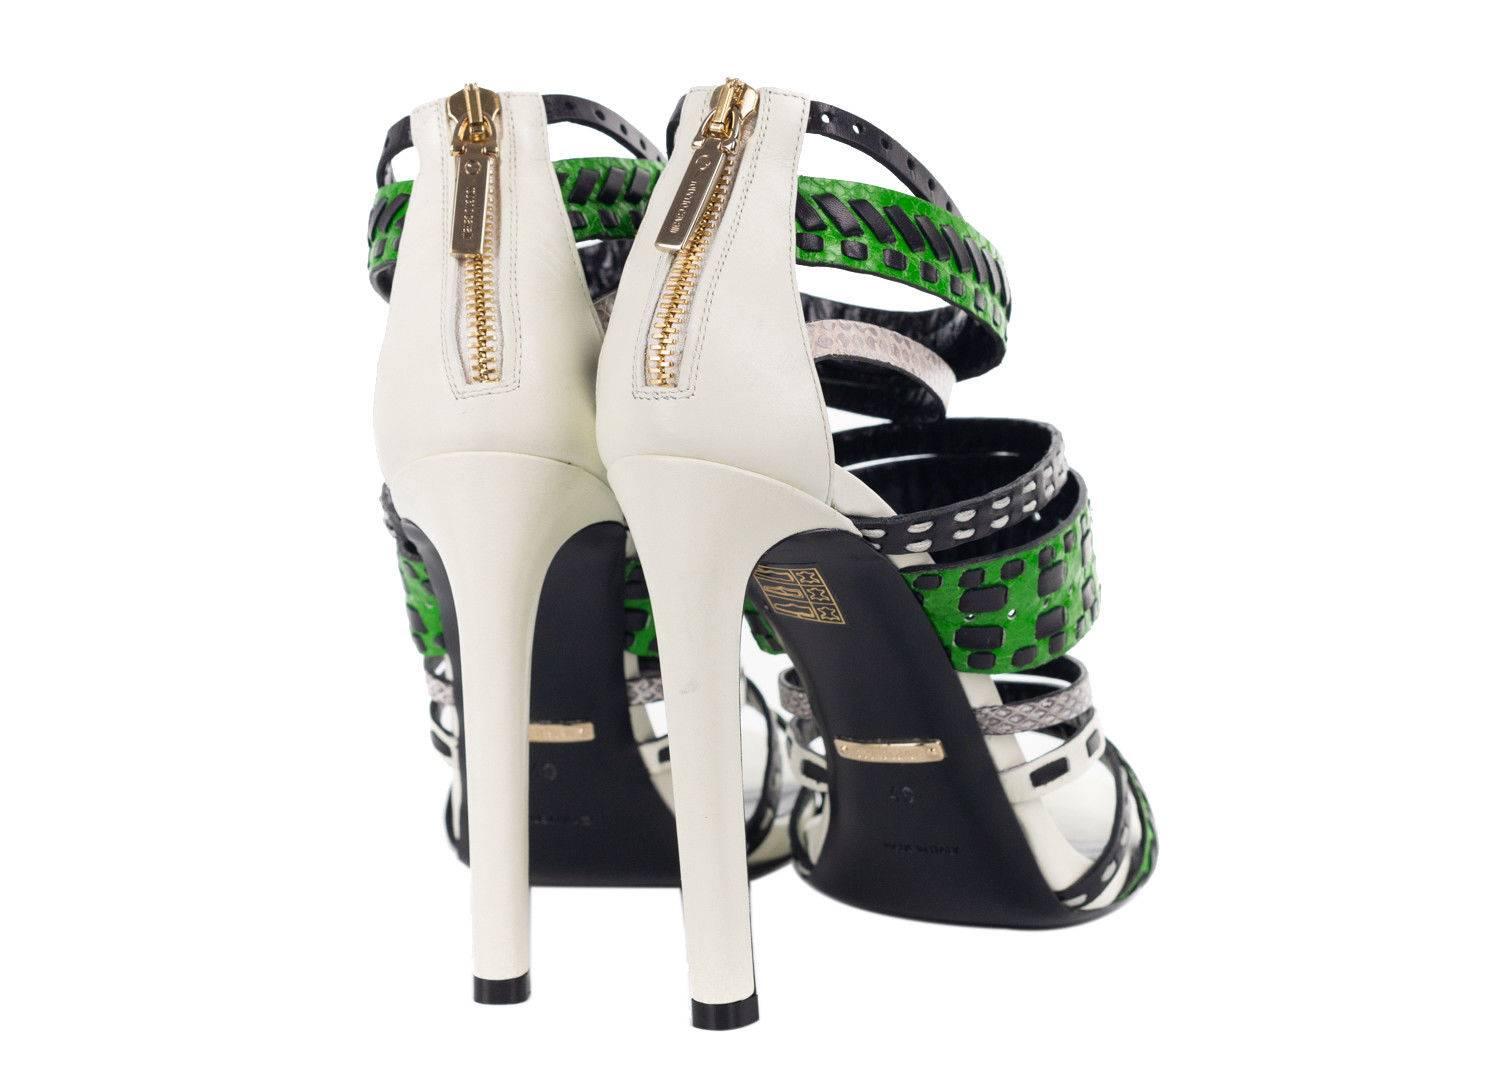 The artistic women decorates all canvases in her Roberto Cavalli Heels. These edgy beauties feature starking multi texture caged straps, black tribal leather stitching, and a calm white base. You can pair these snake texture infused heels with a red